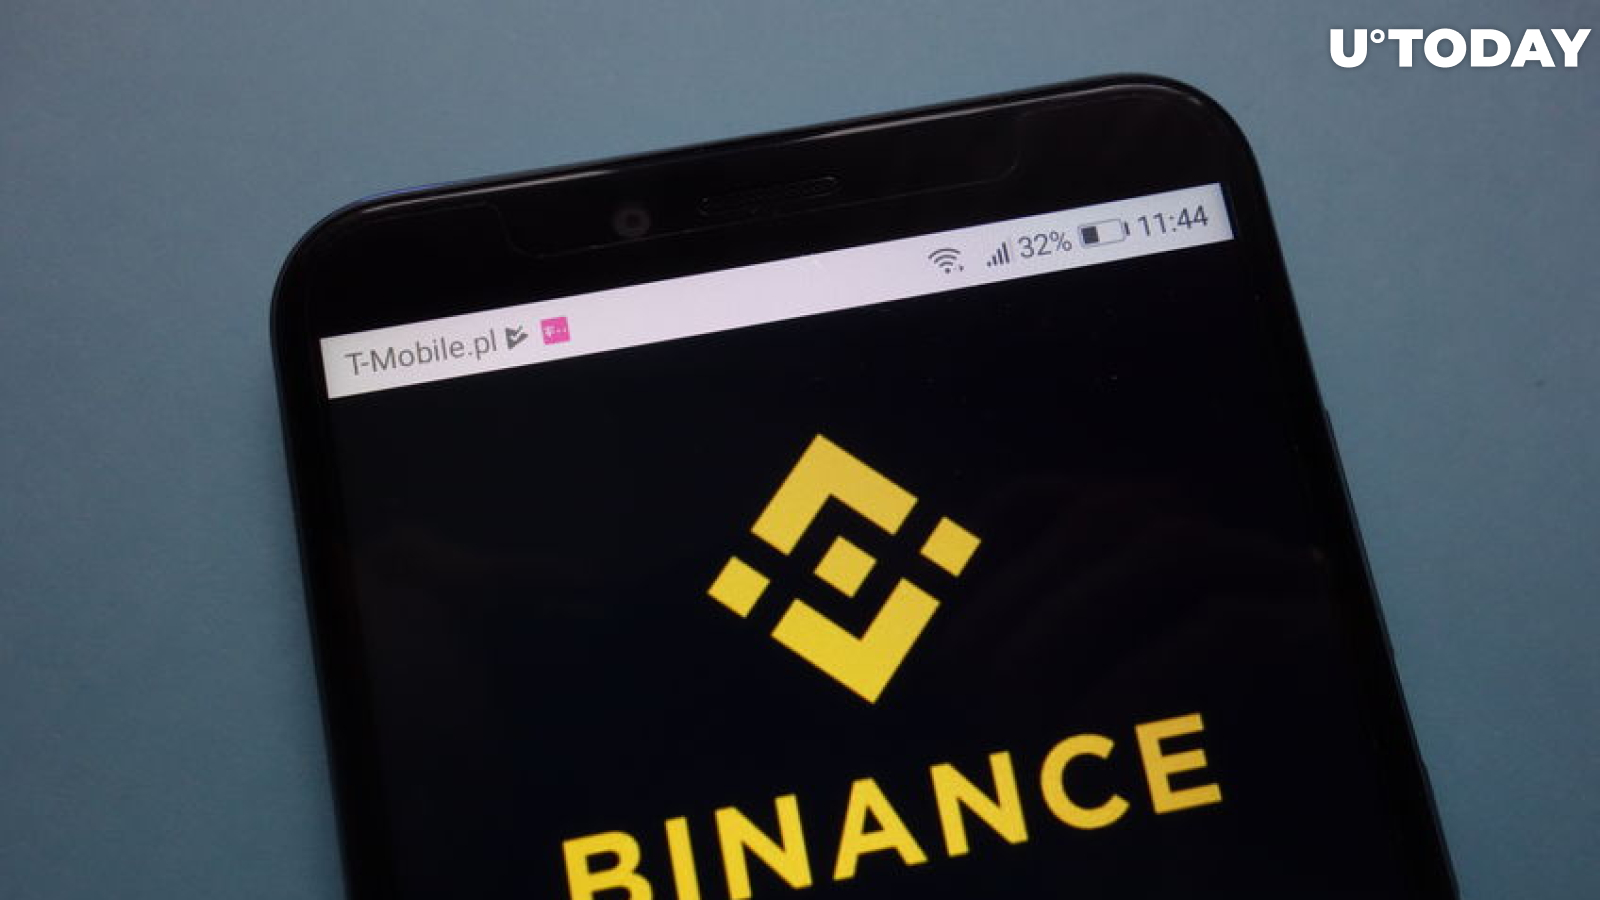 Binance Close to Matching BitMEX When It Comes to Liquidity: Research